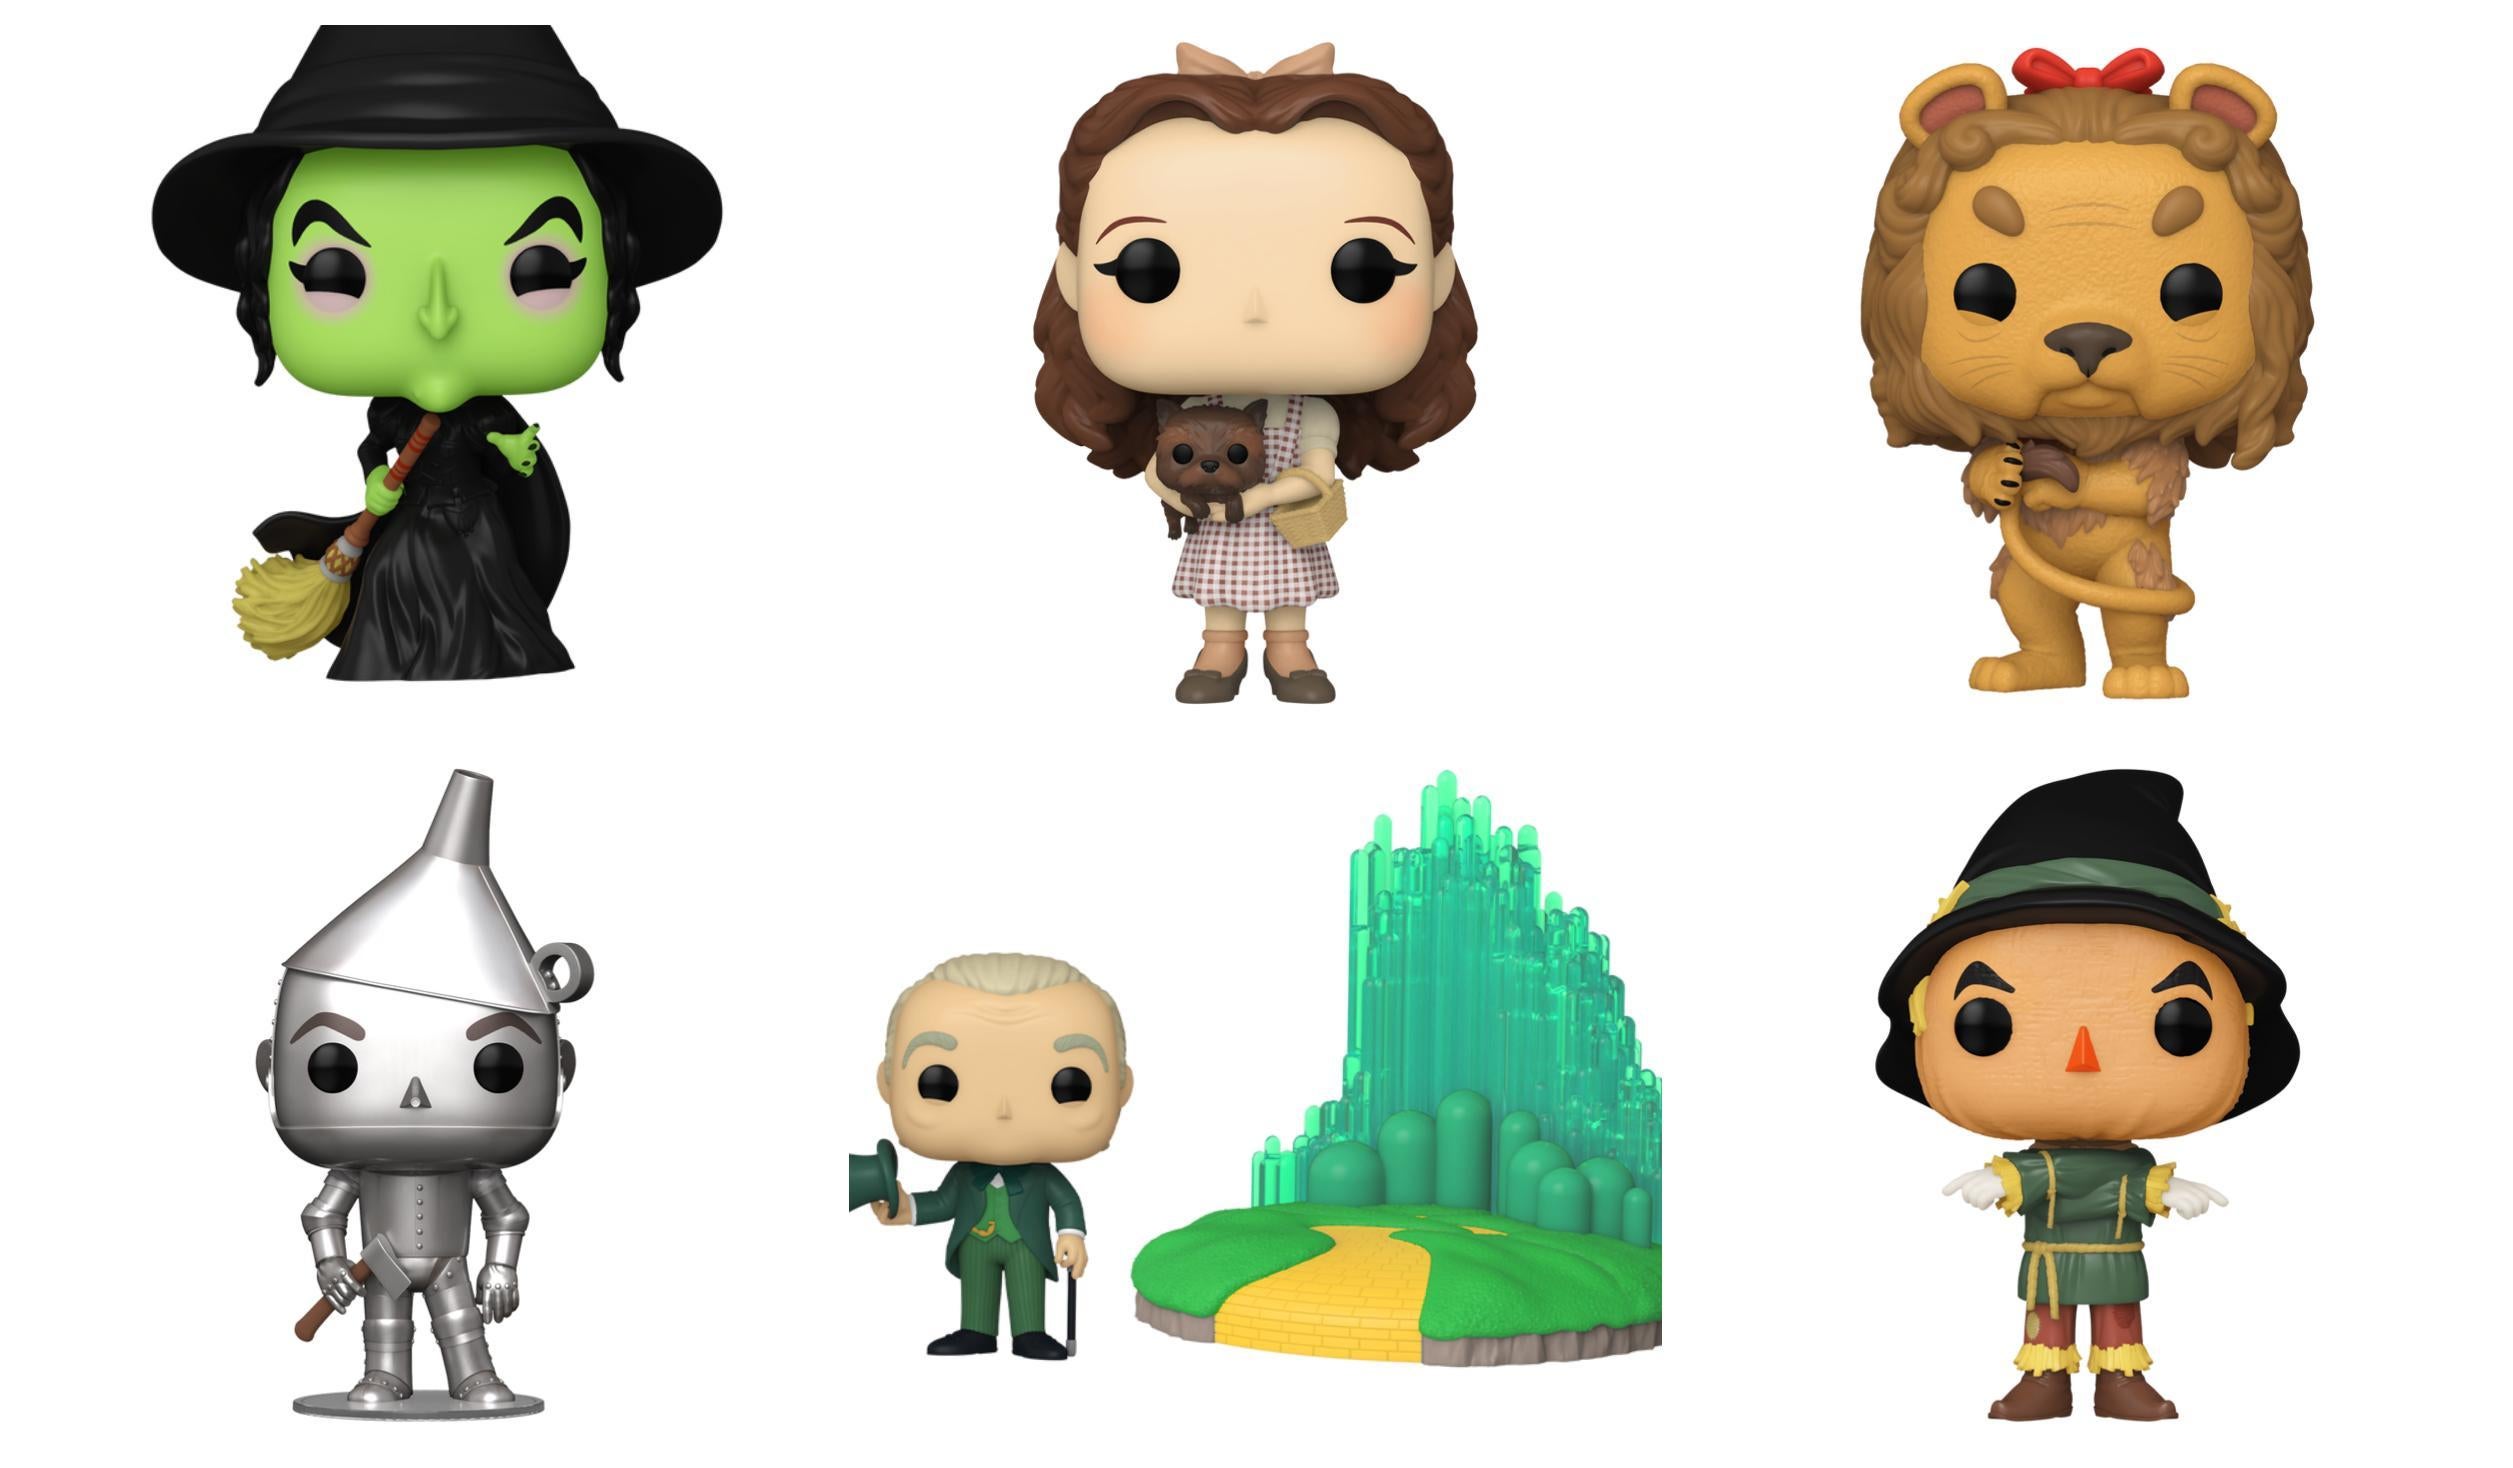 The Wizard of Oz 85th Anniversary Funko Pops Add a Dorothy and Toto Exclusive